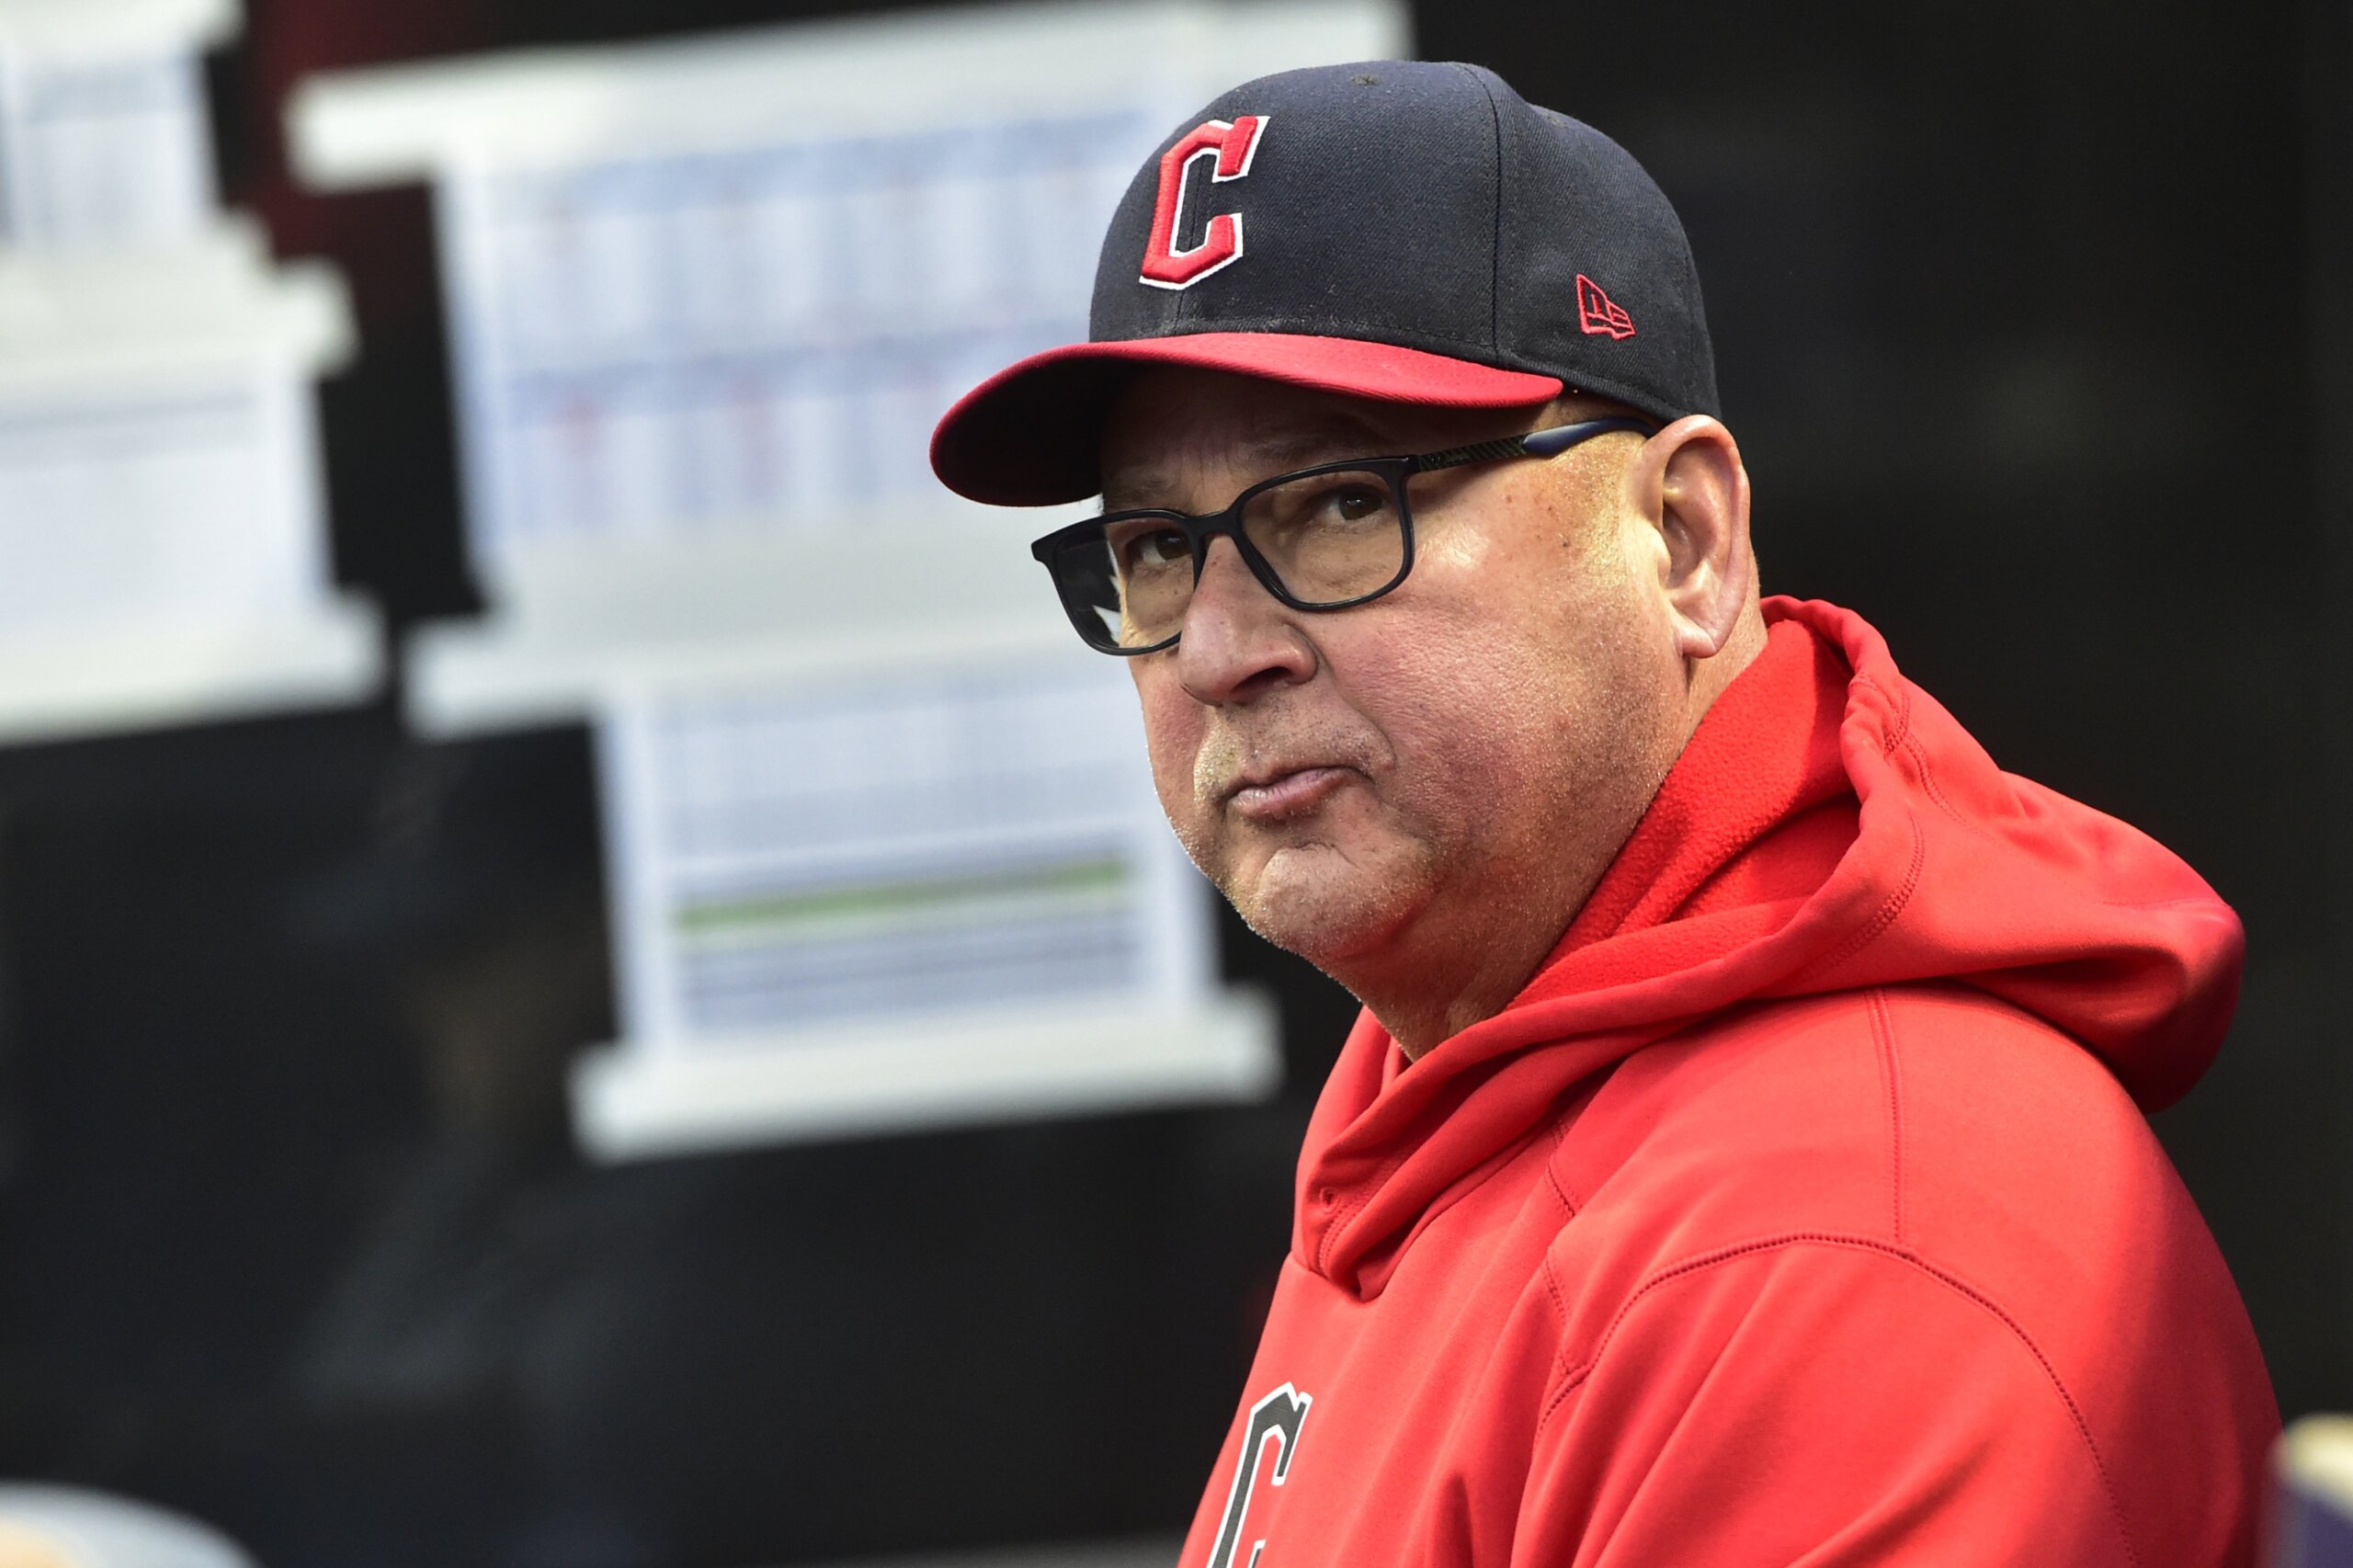 Guardians manager Francona’s scooter stolen in Cleveland